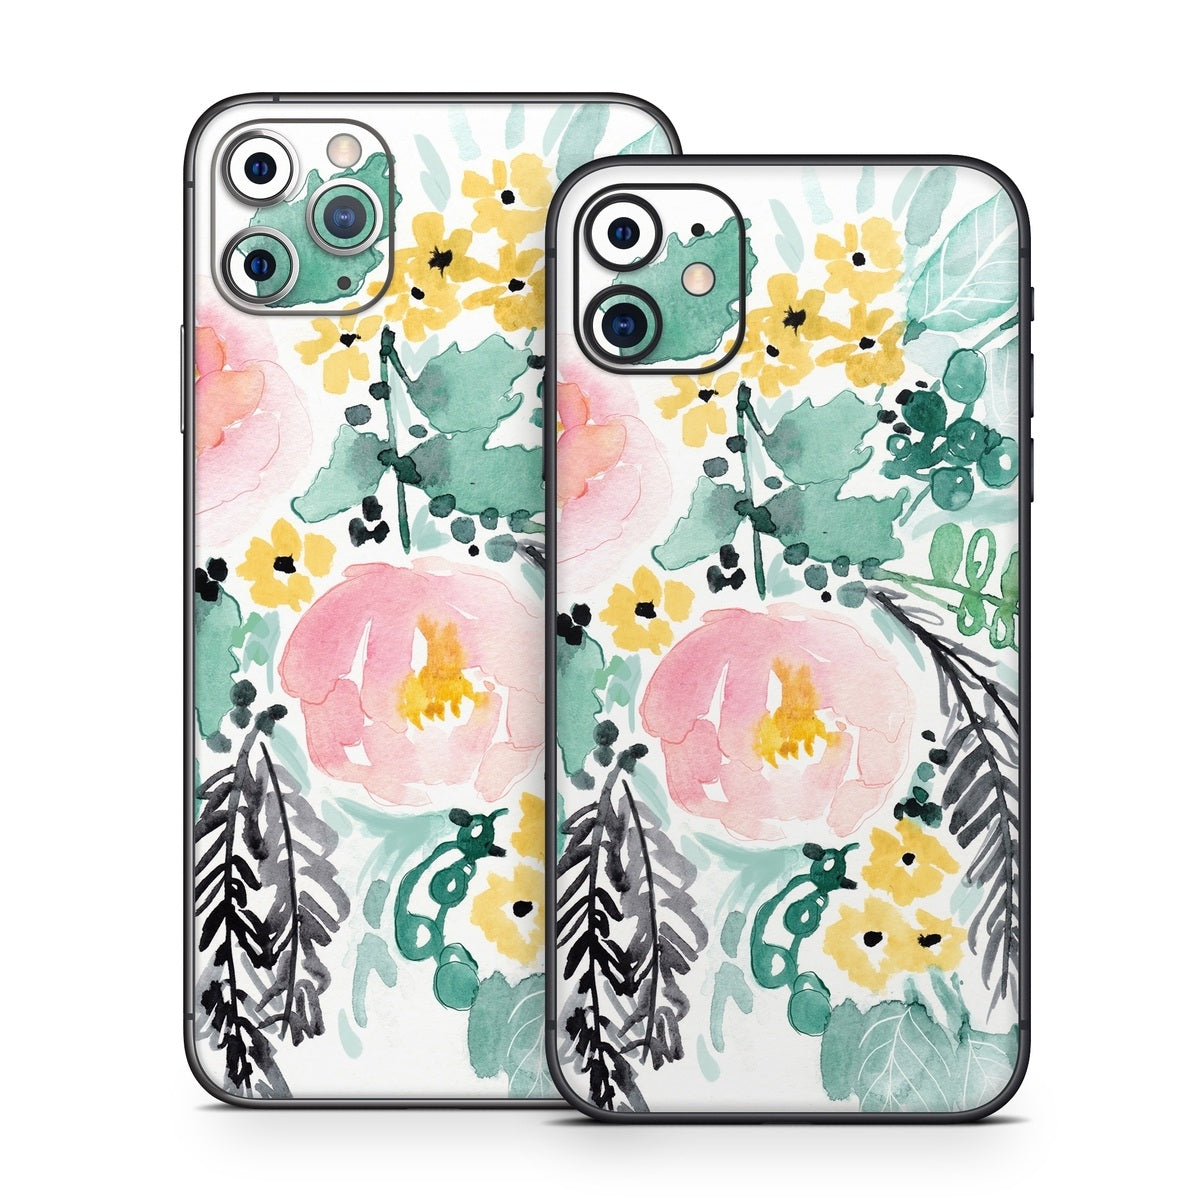 Blushed Flowers - Apple iPhone 11 Skin